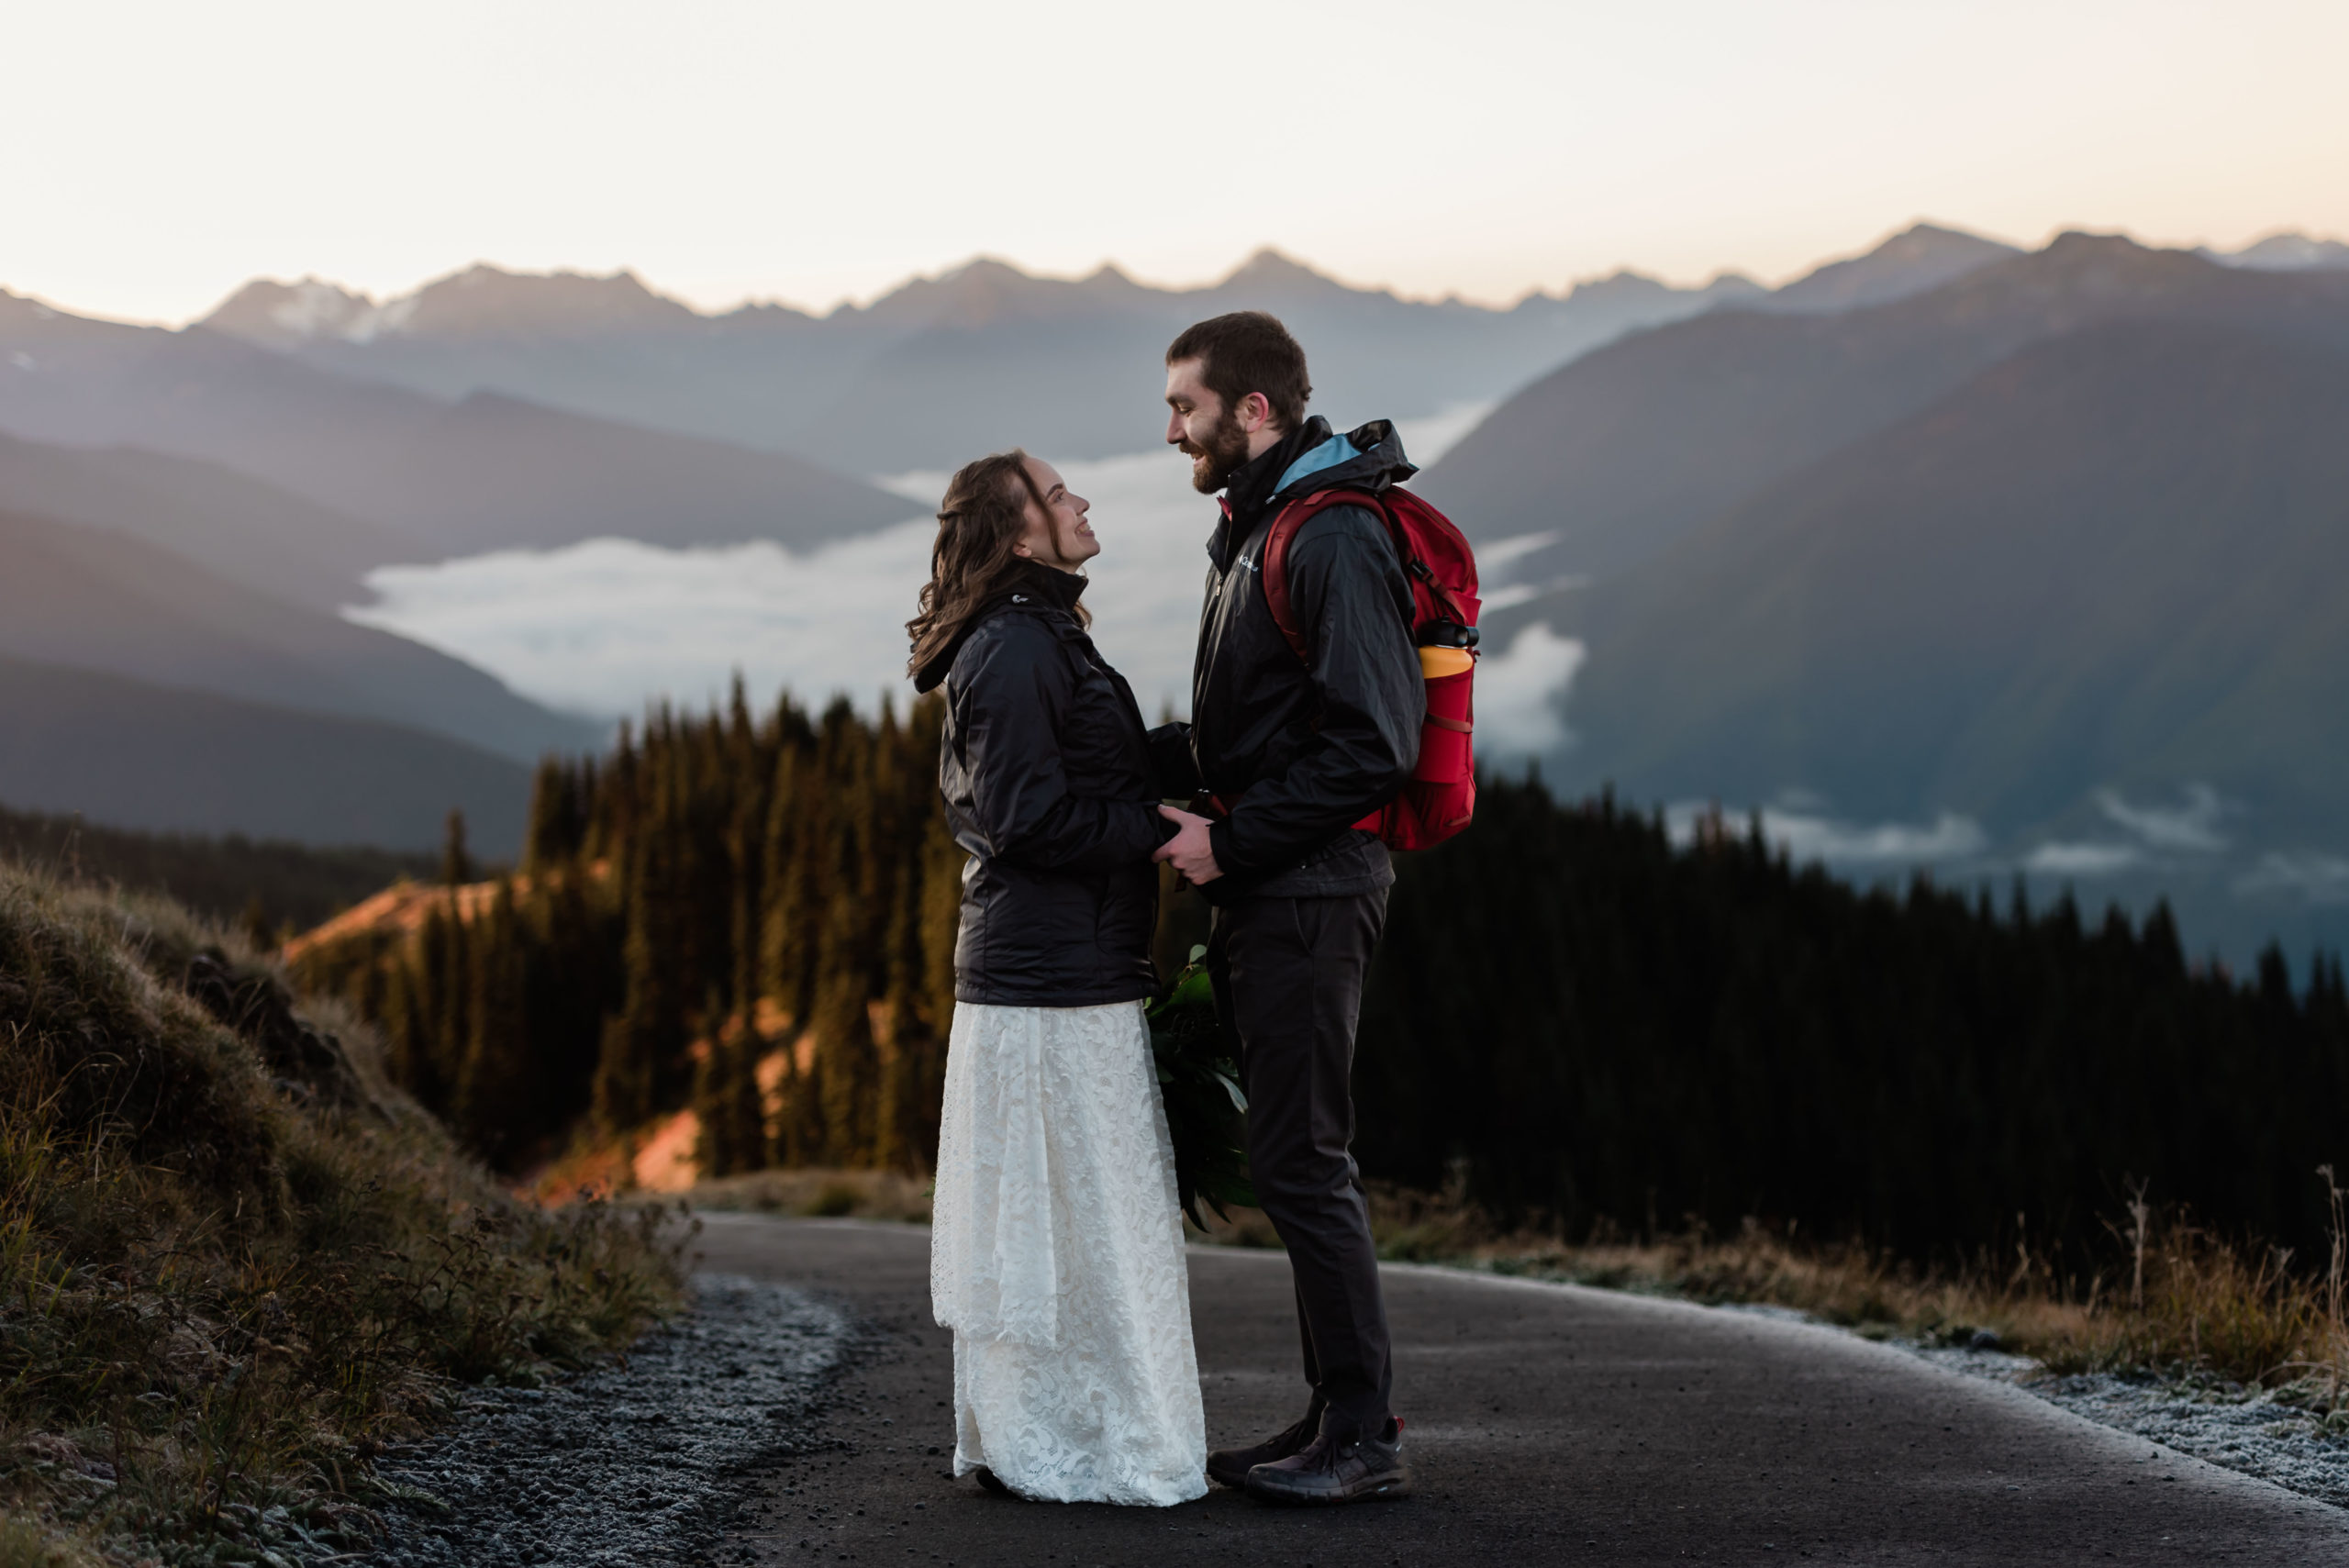 how many people to invite to a wedding? Your wedding should be your special day. This couple adventured together in the mountains, which you can see in the background of them together.